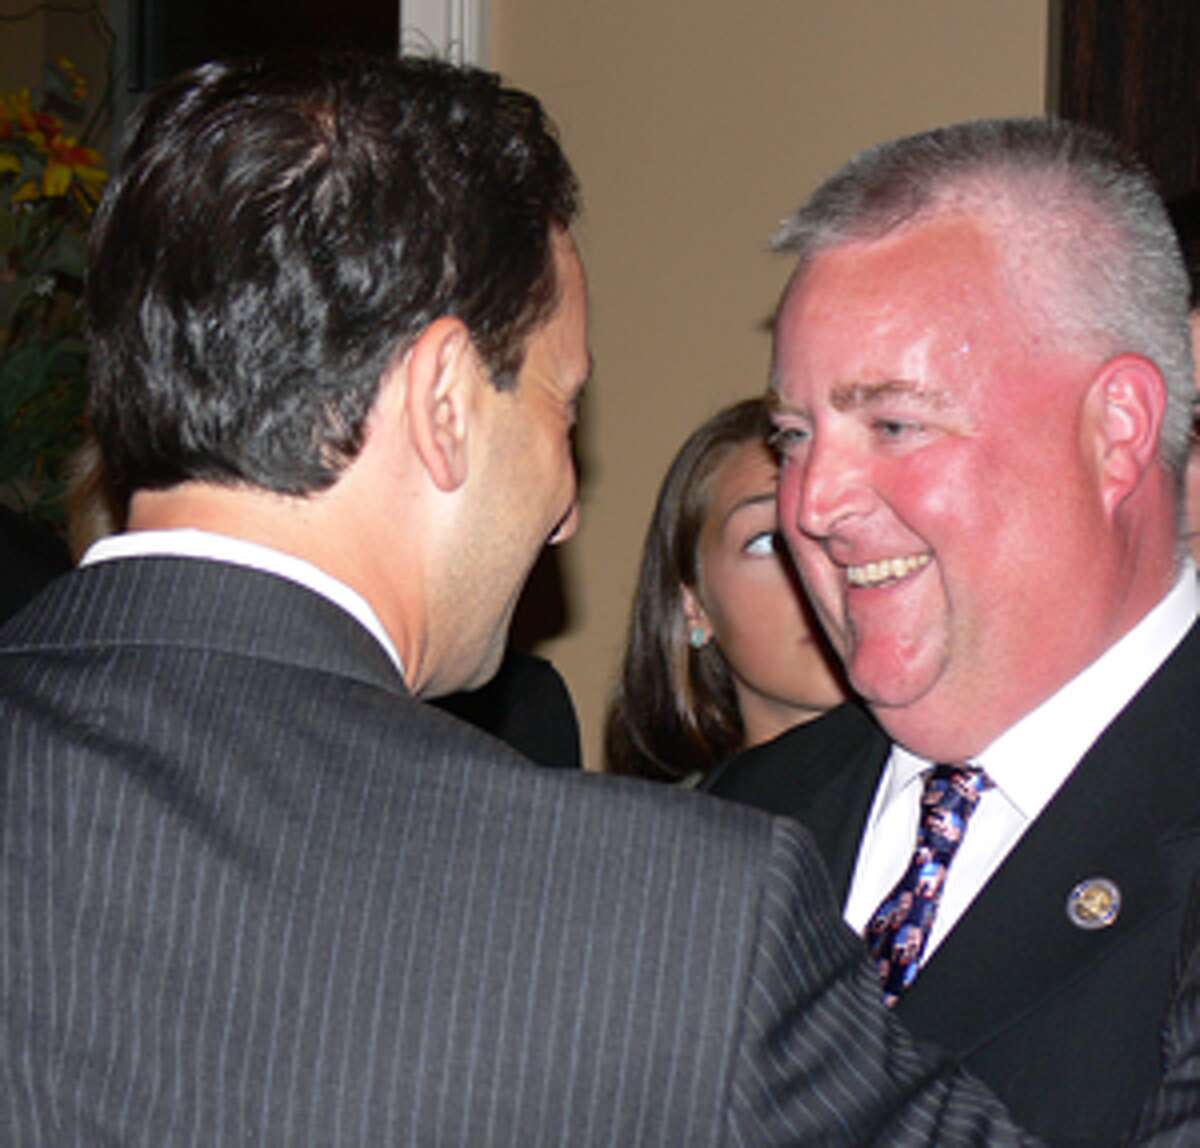 Republican Ben McGorty has plenty to smile about after winning the Republican nomination for state representative.